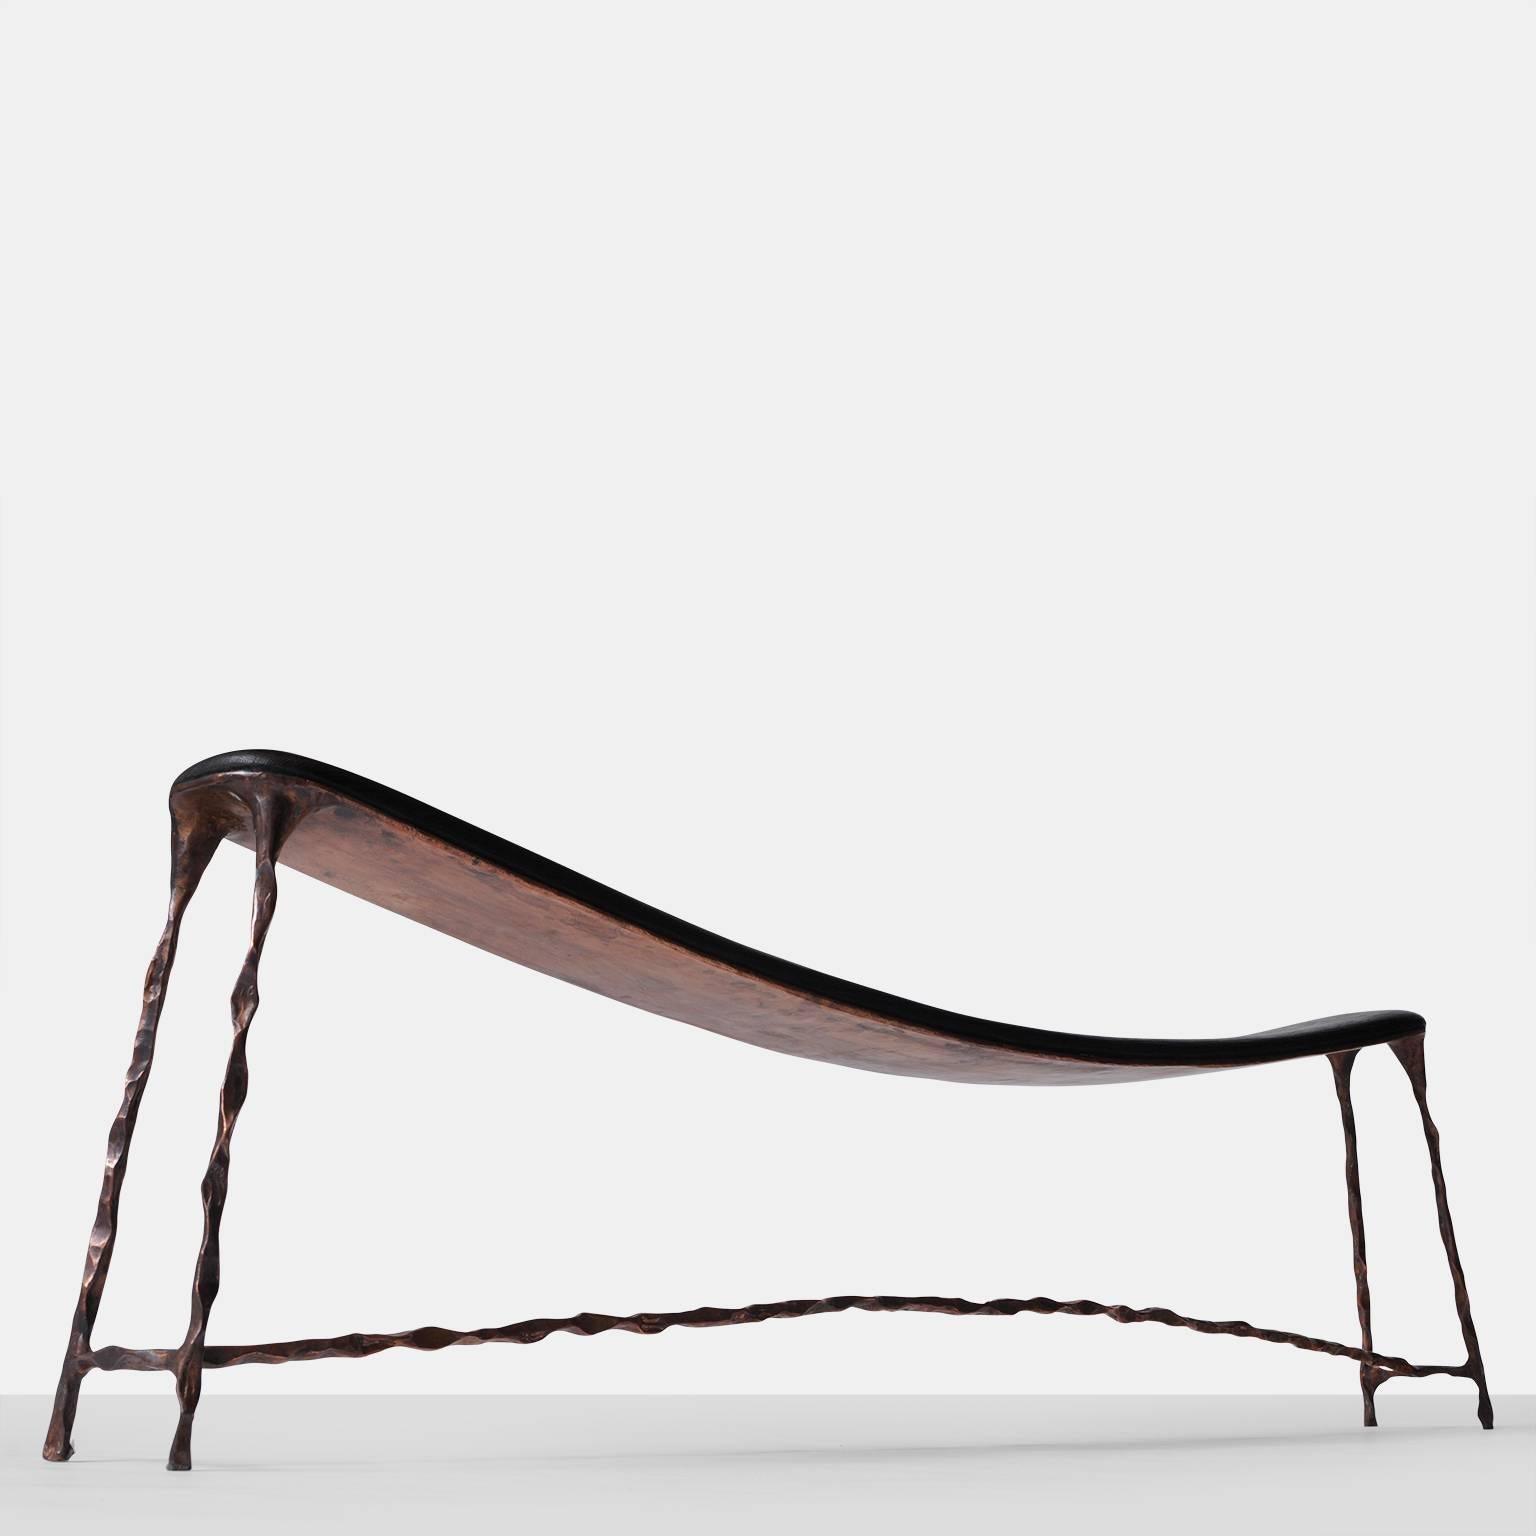 A large-scale bench with a bended and blackened oak top and a base of hand forged copper. Each piece is completely handmade by Valentin Loellmann and all are a limited edition, signed and numbered. Each piece is an original work of art.
Valentin